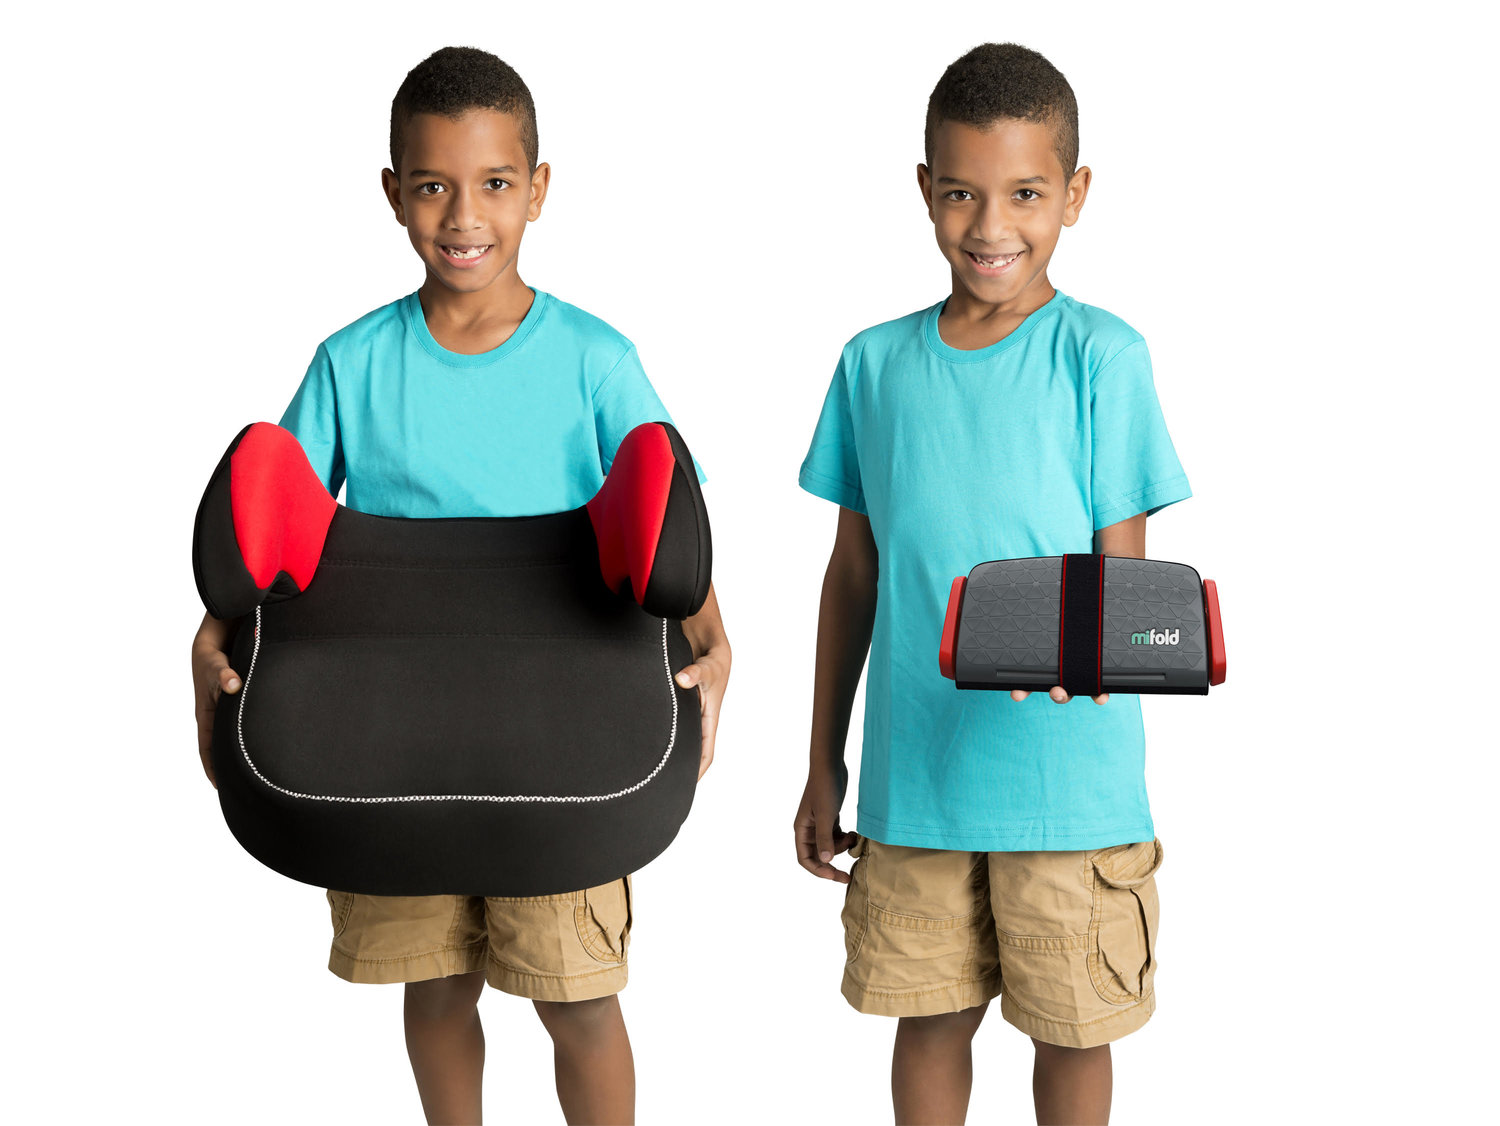 The first question you might be asking is what is the mifold who needs it. The mifold is a revolutionary travel carseat. As with most boosters, the mifold is recommended for children between the ages of 4-12 years old who are over 40lbs and 40 inches tall. The biggest factor I have found in using booster seats with a seat belt is your child’s ability to sit up straight without slouching. This is just as important with the mifold as it is traditional booster seats.  My first impression of the mifold is that it is so small! When they say it is 10x smaller than regular boosters they are not kidding. I’m pretty sure it’s about the same size as my son’s ipad. And come to think of it, weighs less too! (OK the truth is out.. we still have the old version of the iPad! The newer versions actually weight less than the mifold!)  Is it safe?  After I hear the initial “WOW”, the first question I get is “Is it safe?”. The mifold is just as safe as a regular booster. It has been approved by the transportation authorities (NHTSA in the US) in Europe, Canada and the US. The main difference between a regular booster and the mifold is that a traditional booster lifts the child up so that the car’s seat belt is at at the right height on the child. The mifold on the other hand pulls the seat belt down to the child’s level.  I definitely recommend watching one of these  instructional videos &nbsp;in advance so you know exactly how to use it before your first attempt. However, that said, it is  really easy to install and is perfect for on the go travel in taxi’s, Uber and Lyft.   A few key things to keep in mind if you are using it in different vehicles like we do. The installation of the seat is dependent on the type of ‘crease’ that is exists in the car you will be in. For example some cars the top part of the seat is raised above the seat bottom, whereas some vehicles do not have the crease. Check out the full length video linked above to see how the installation differs between the two.   Cian’s Complaint   